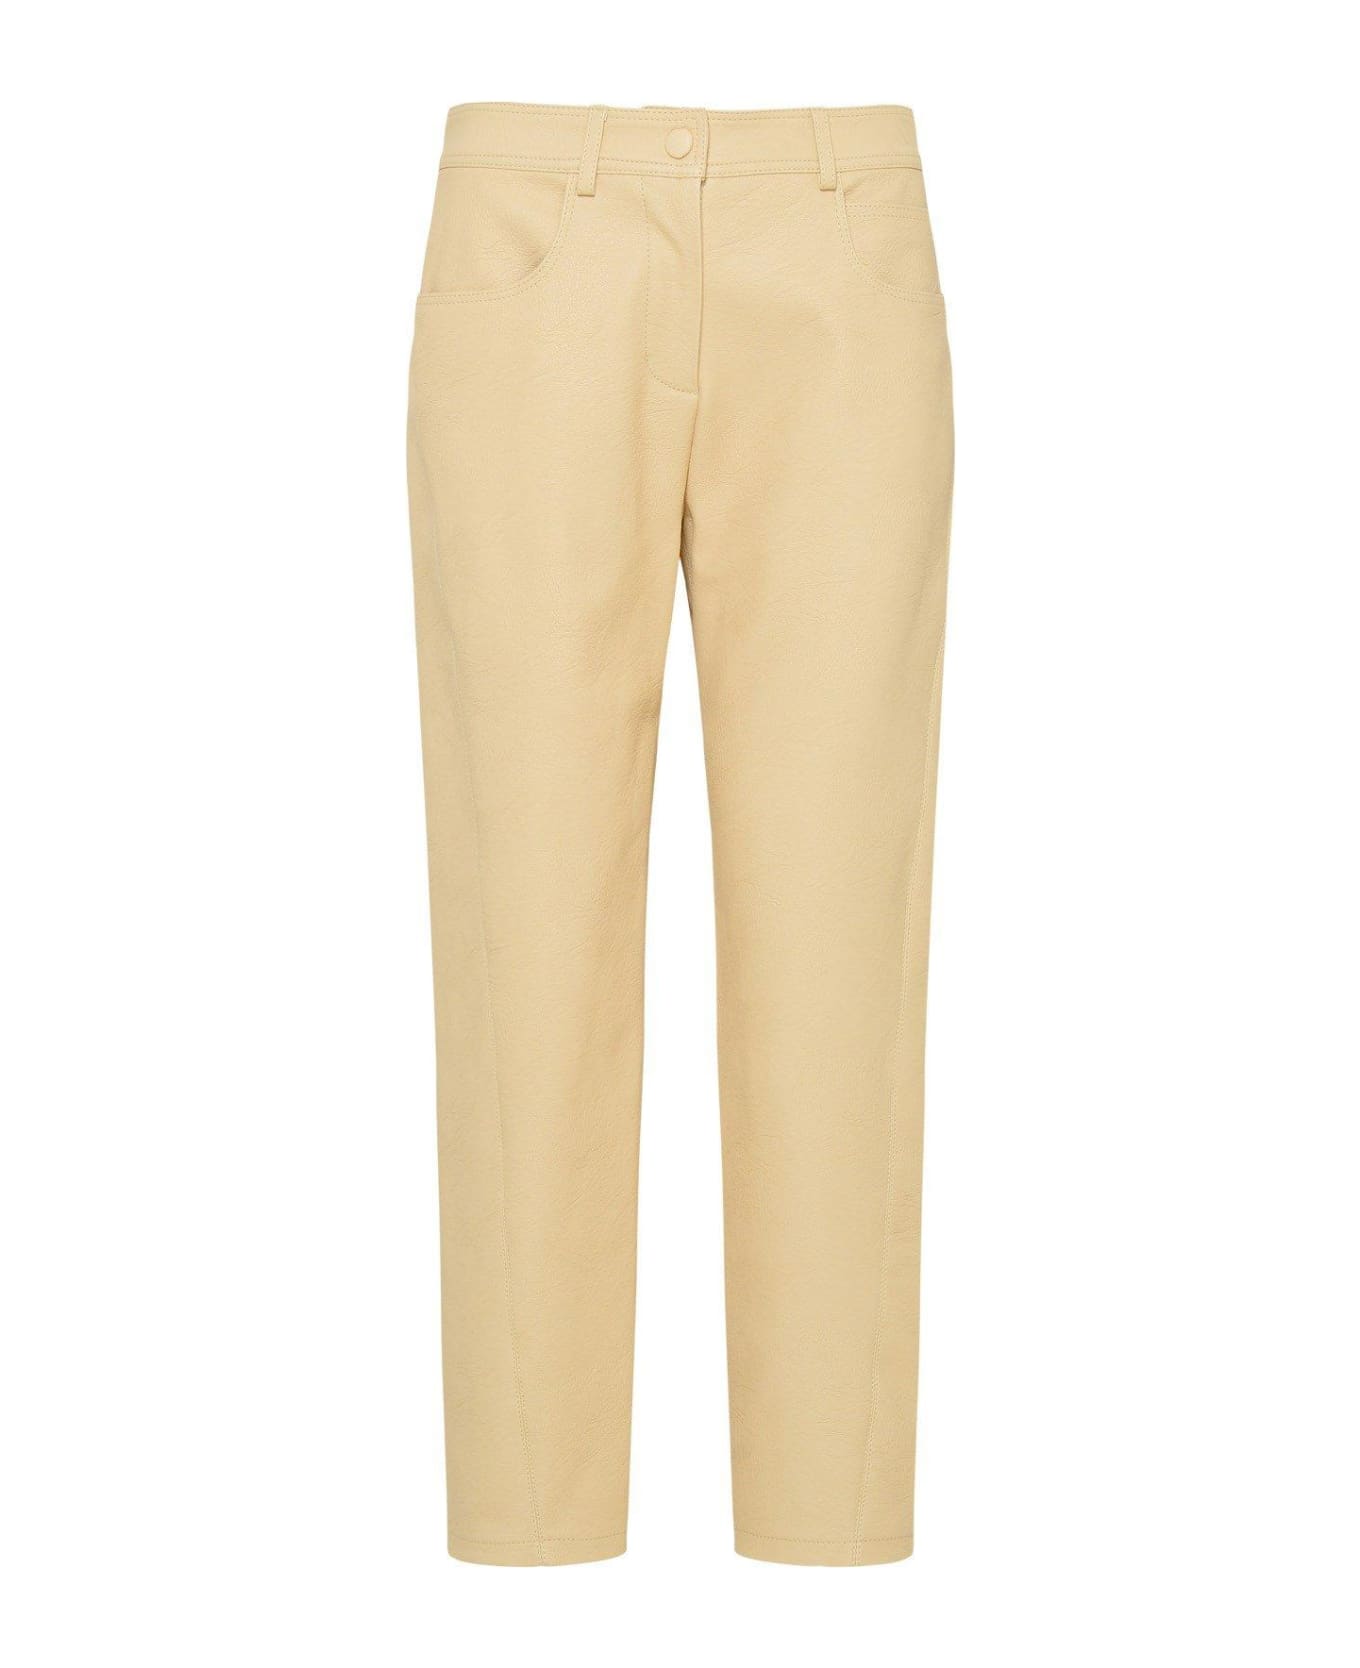 Stella McCartney Contrast Stitched Cropped Trousers - Beige